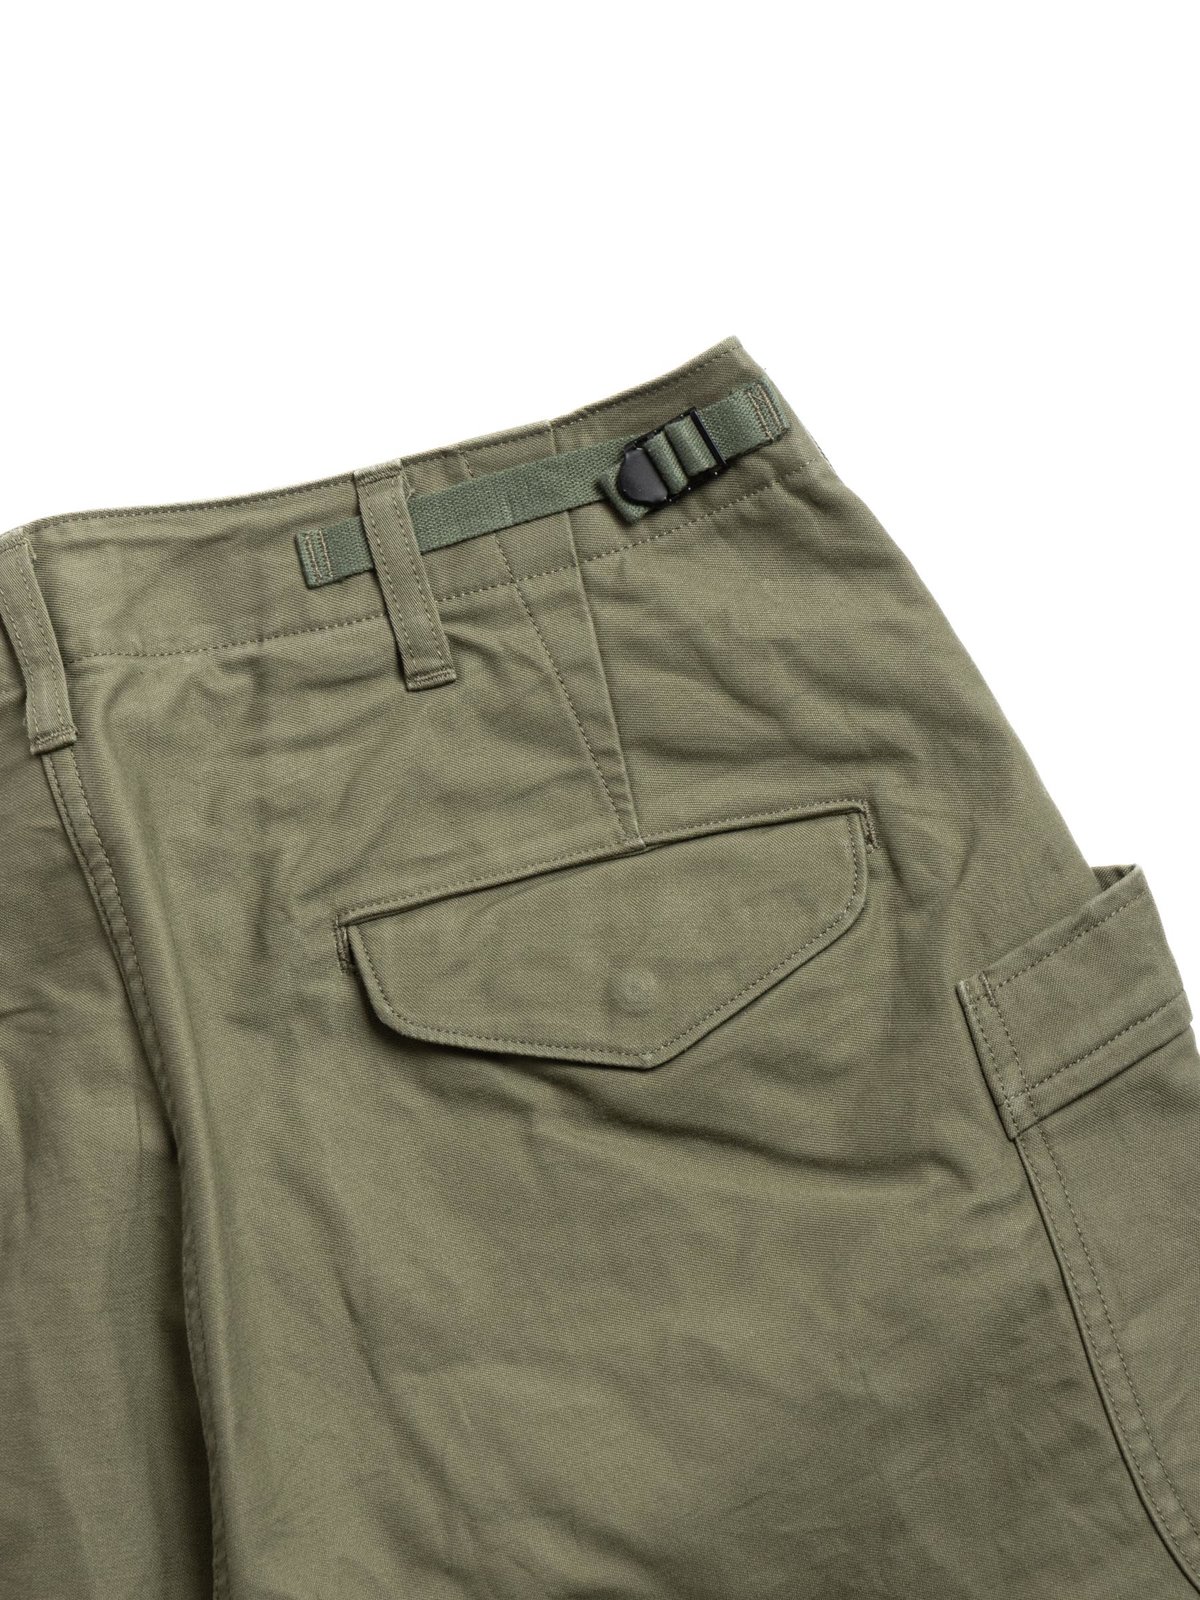 OrSlow US Army Fatigue Rip-Stop Pants (Regular Fit) - Beige – Totem Brand  Co.